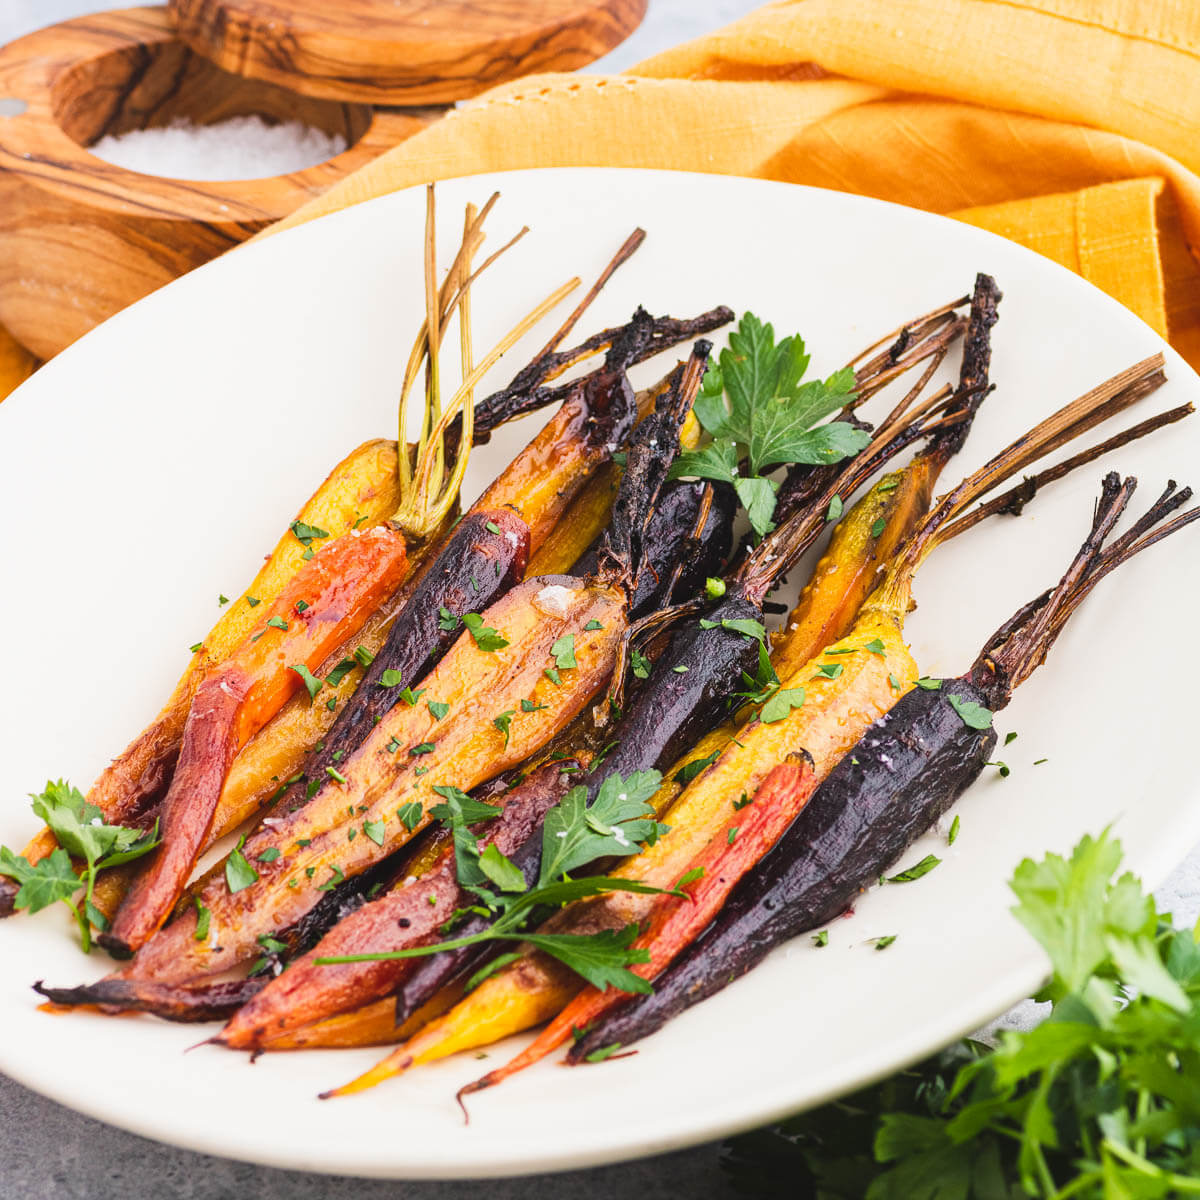 A white oval platter containing colourful maple balsamic roasted carrots garnished with coarse salt and chopped parsley.